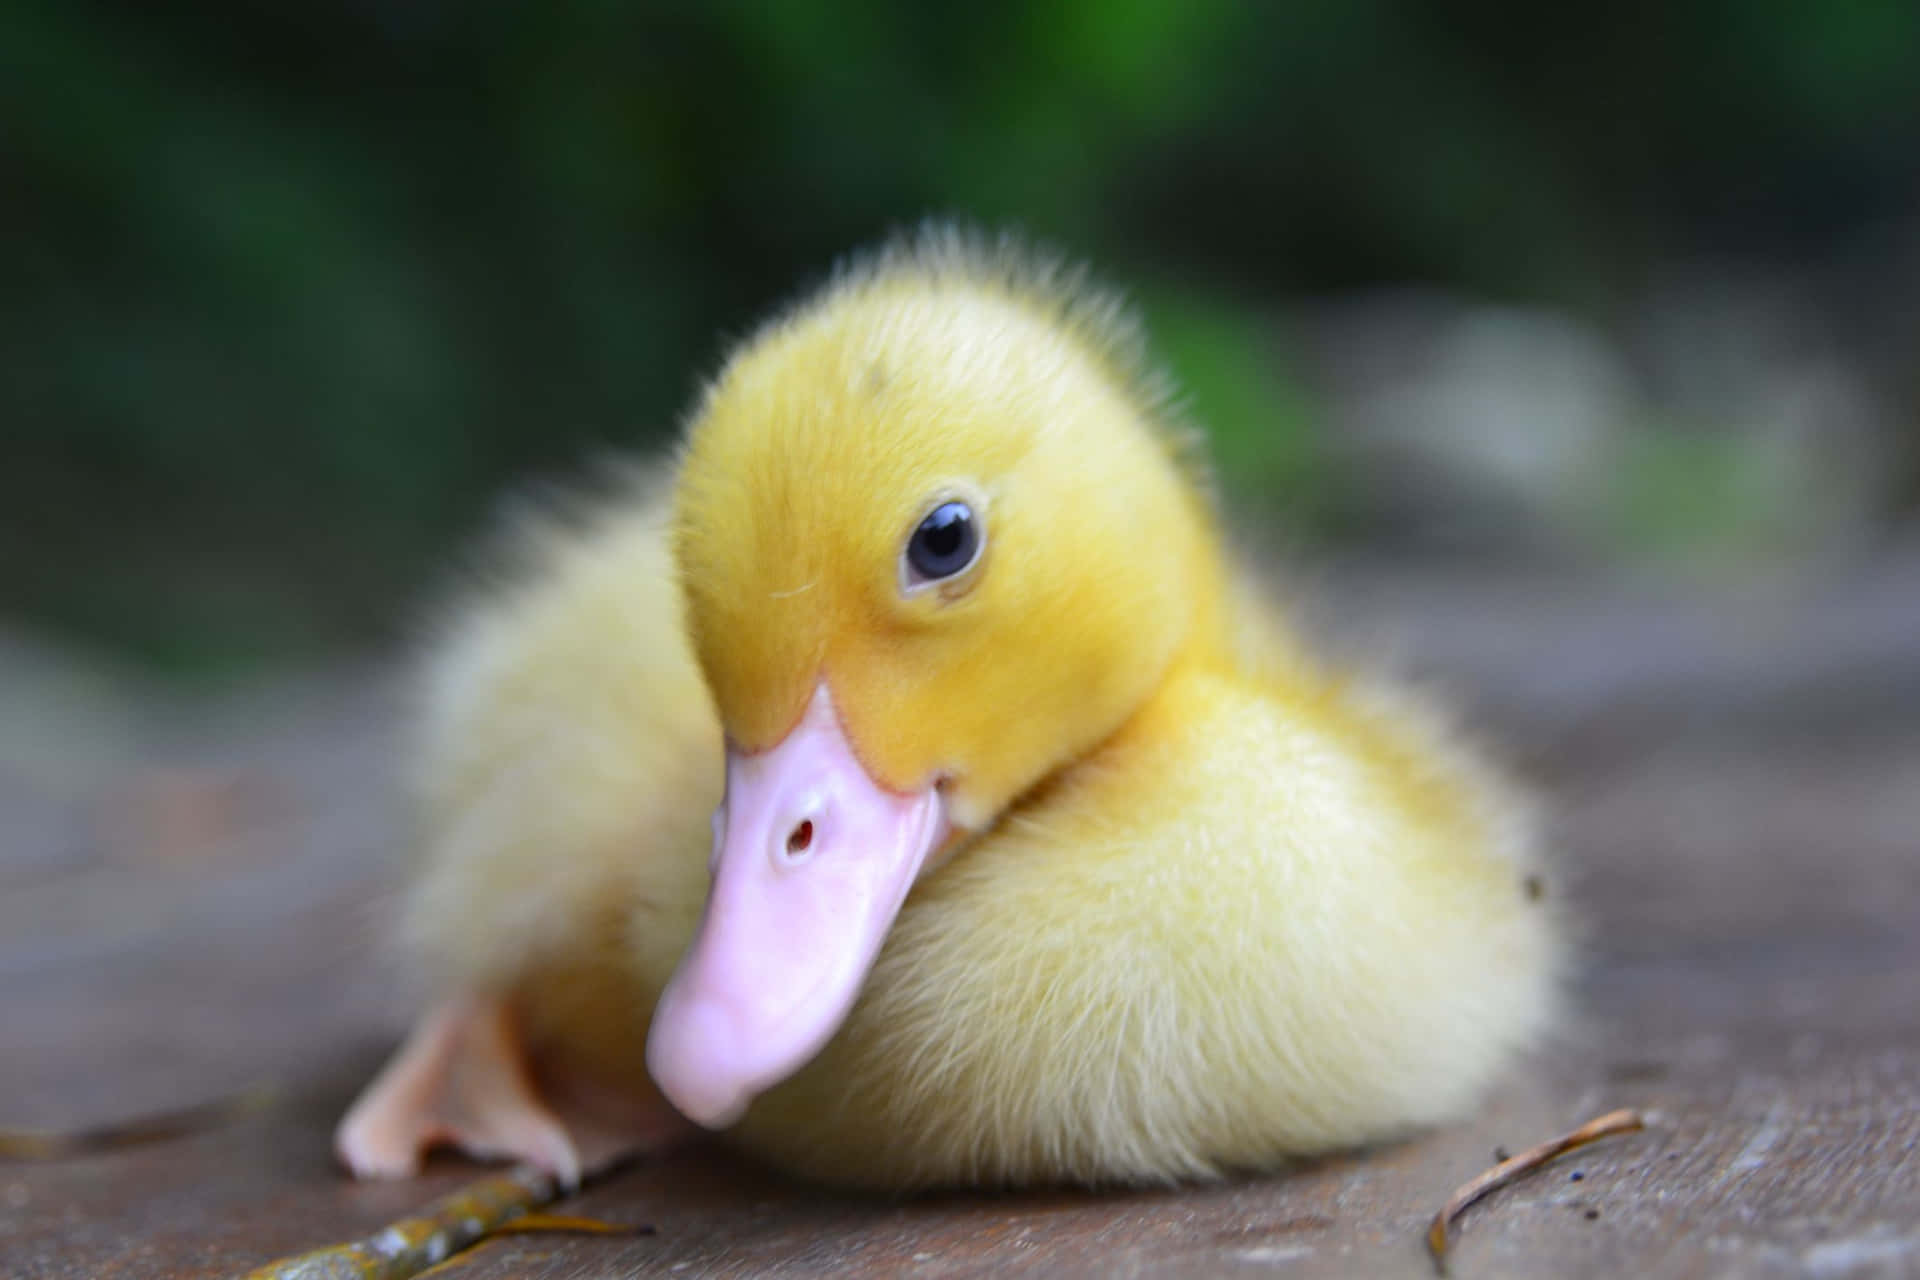 Welcome to the world, sweet baby duck.